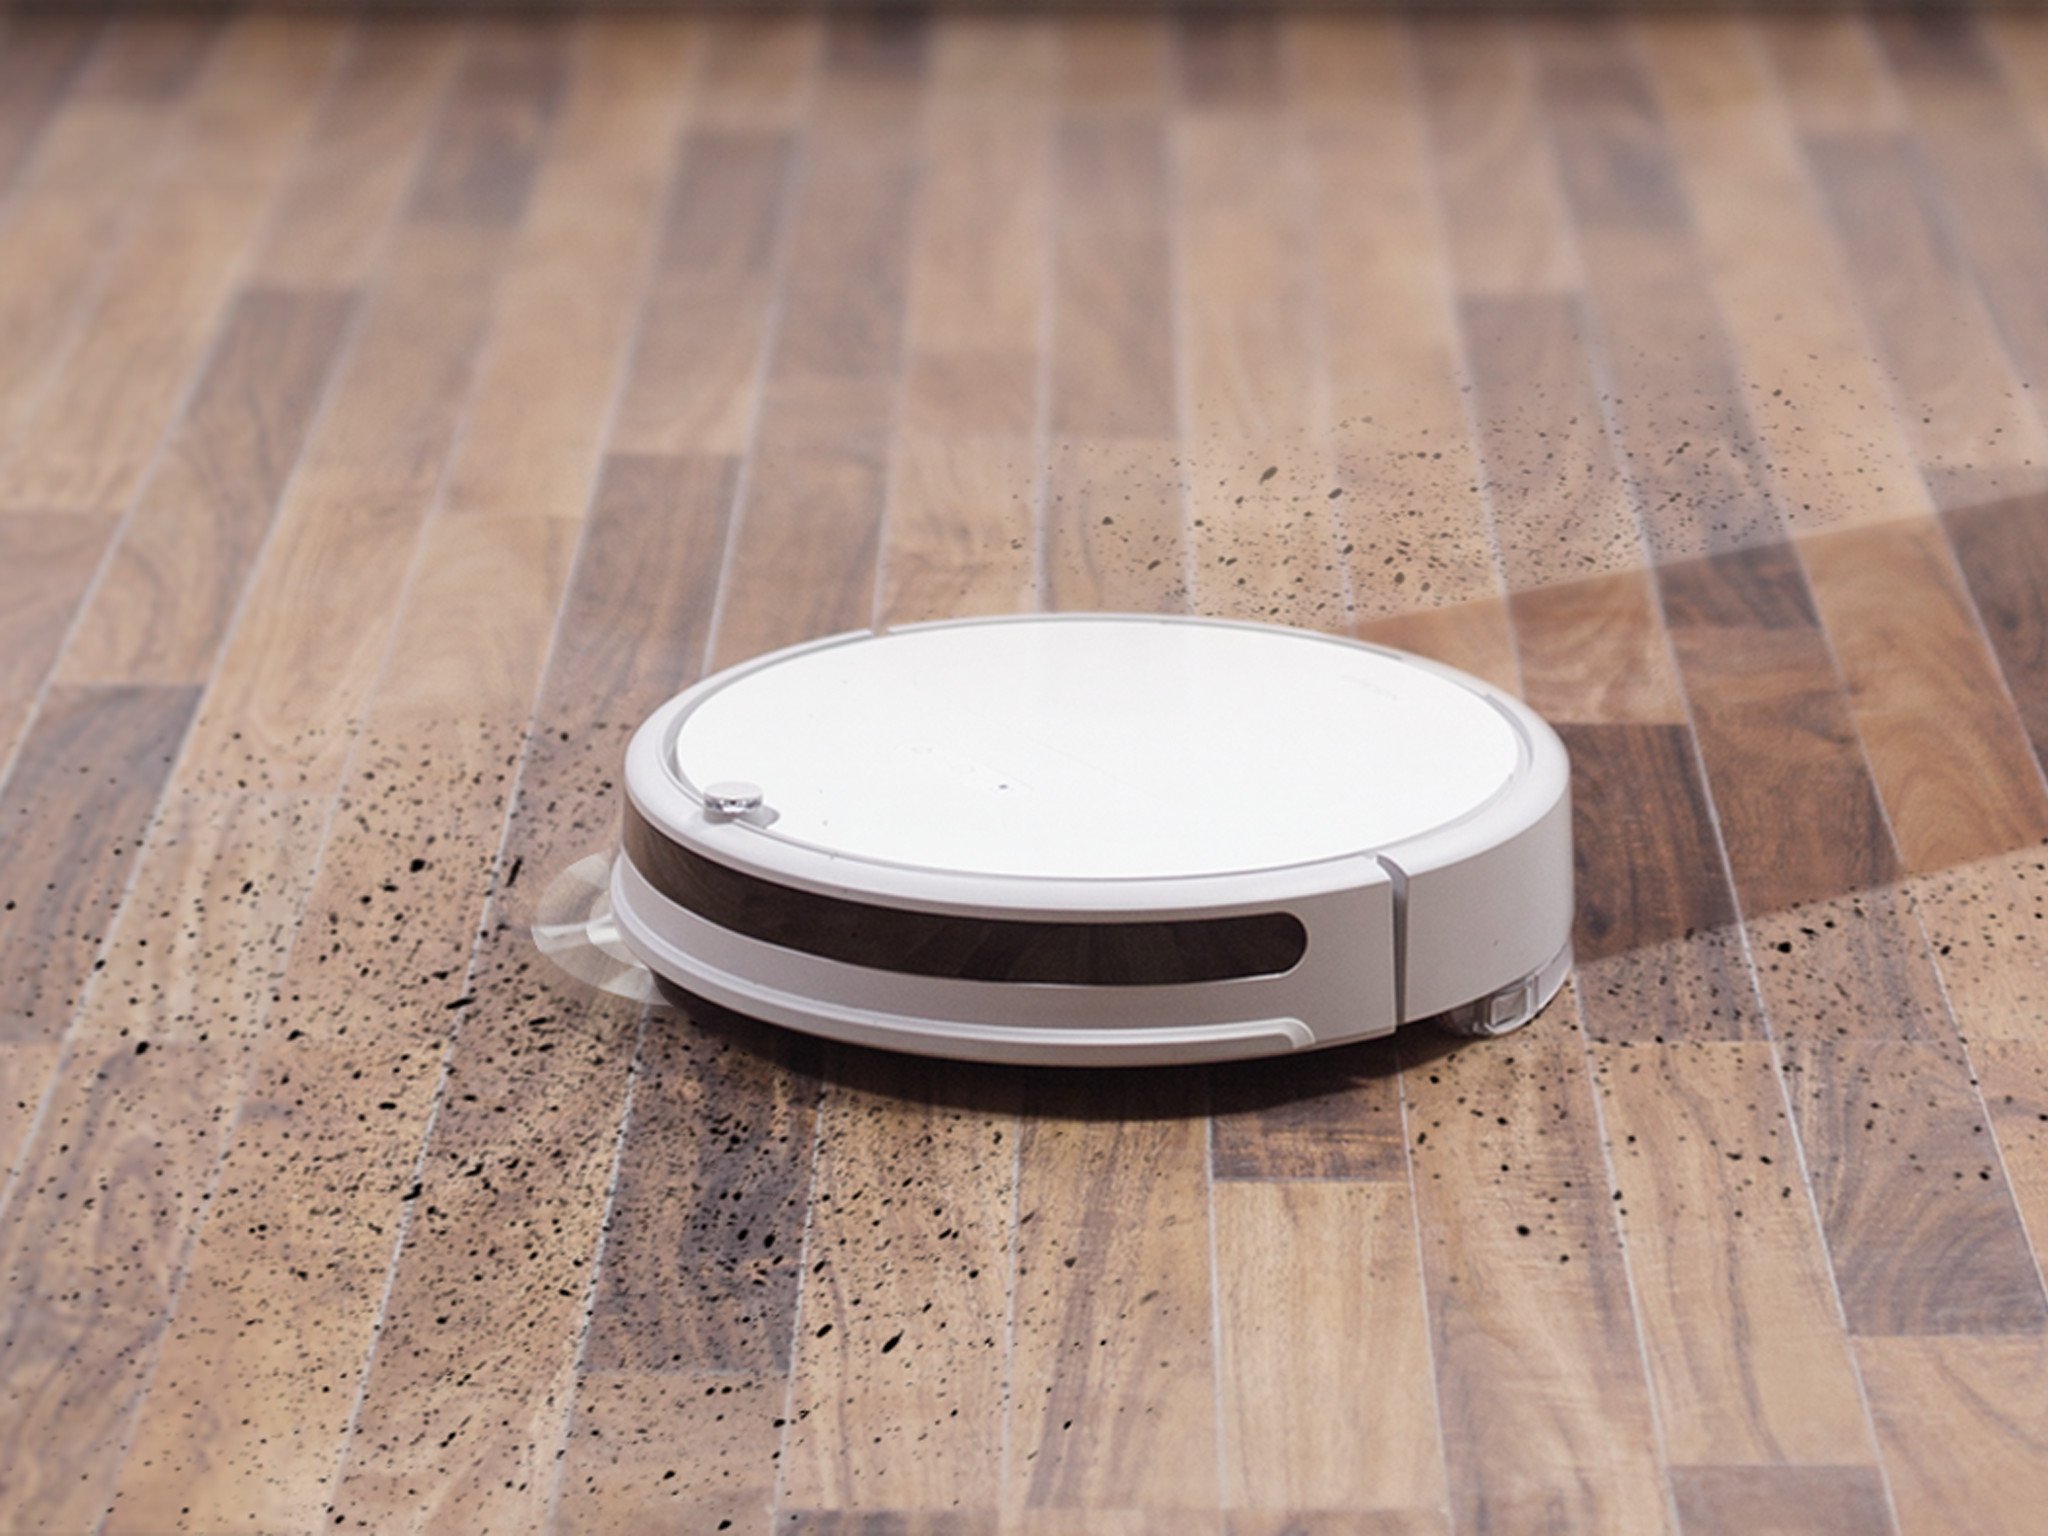 https://www.androidcentral.com/sites/androidcentral.com/files/styles/large/public/article_images/2019/02/roborock-e20-robot-vacuum-cleaner-main.jpg?itok=tJ7oNmvL